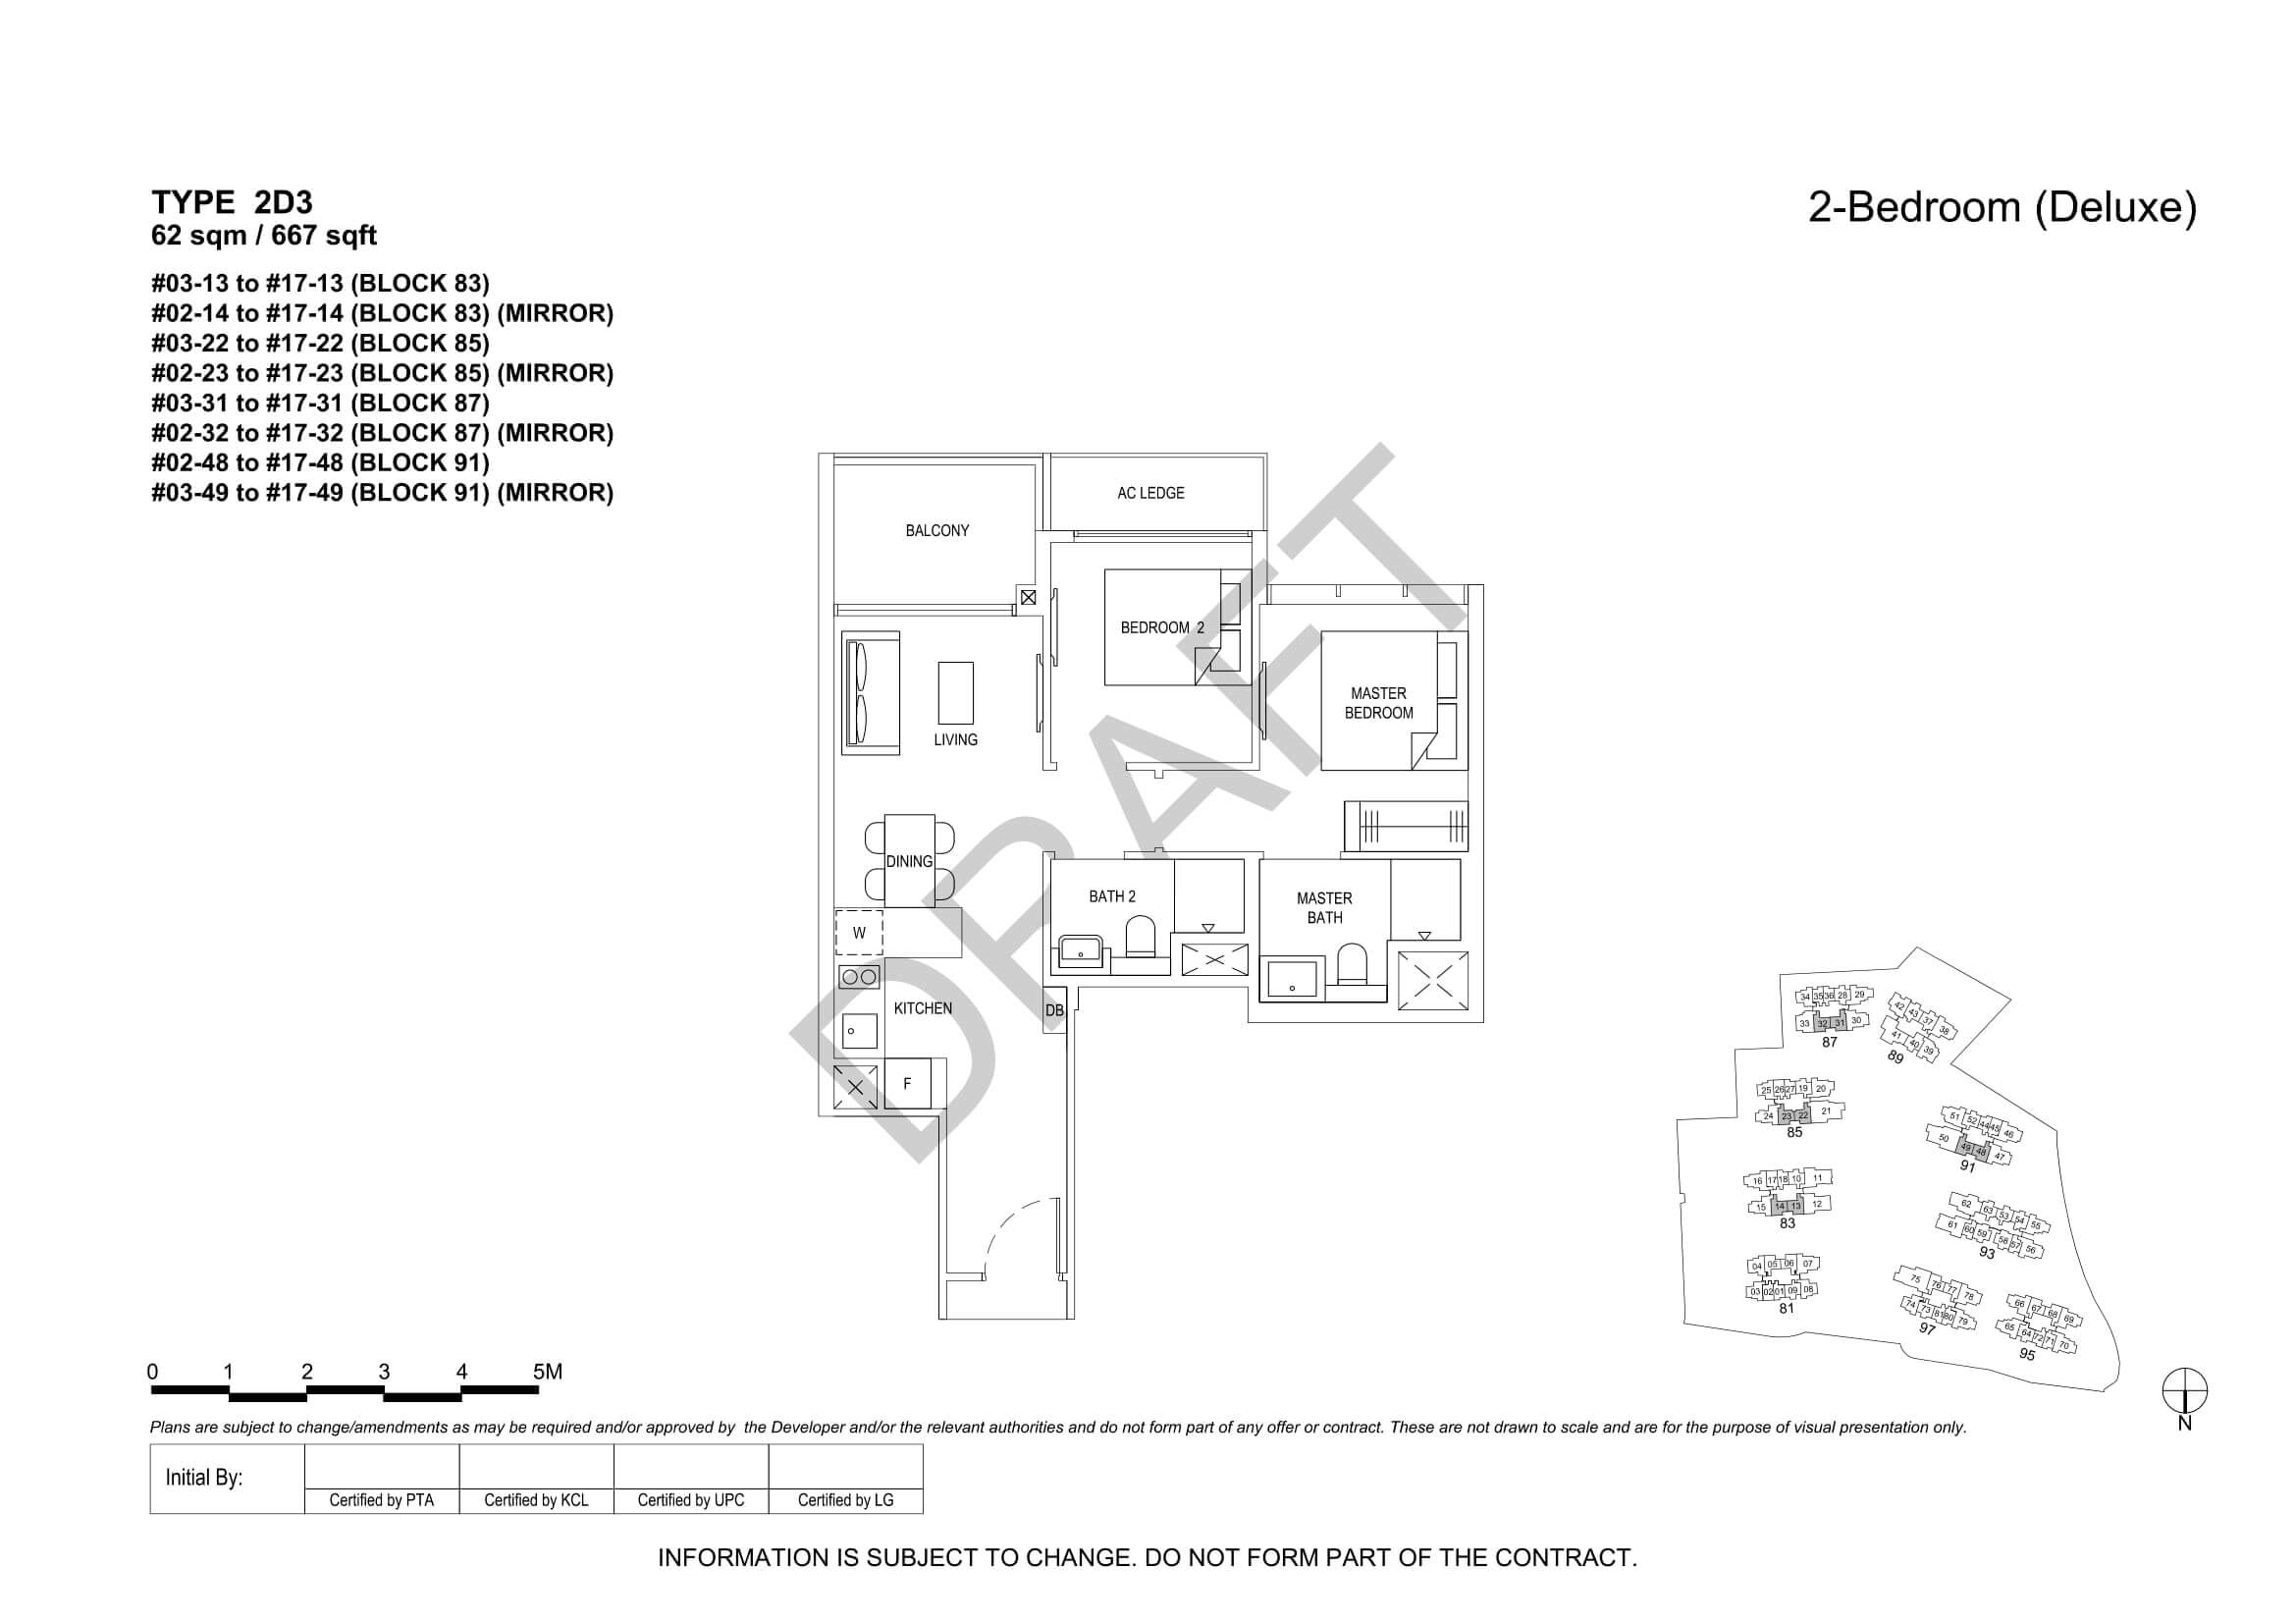 The Florence Residences Floor Plan 2-Bedroom Type 2D3